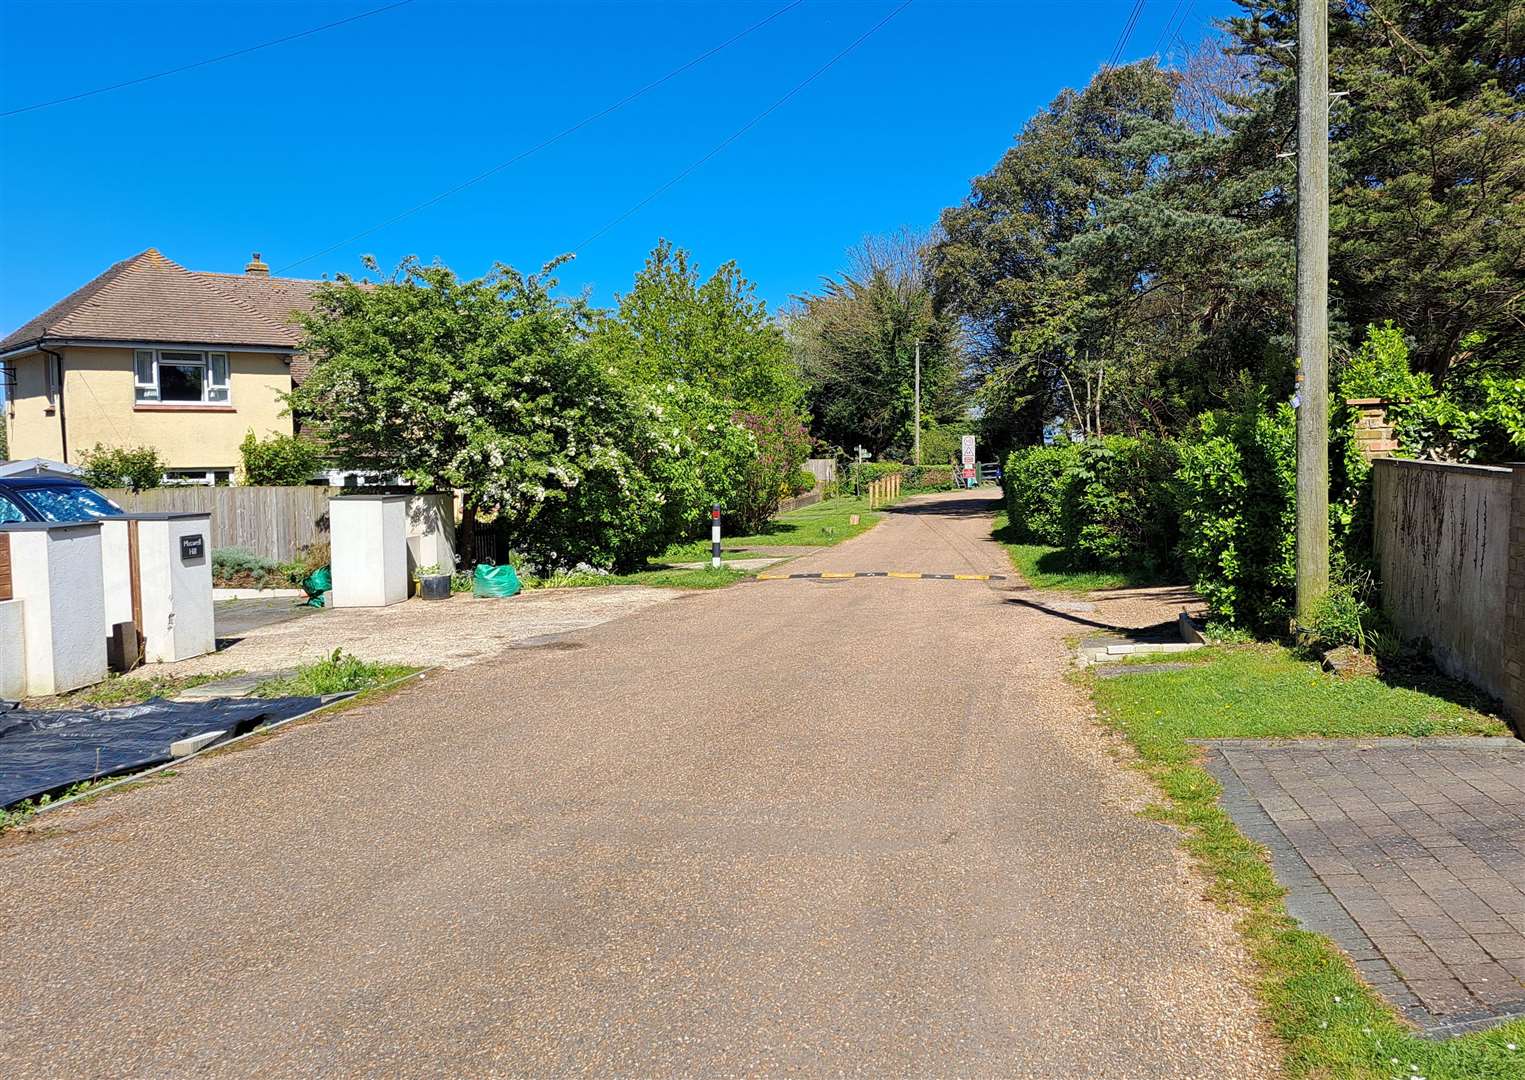 General view of The Avenue, Kingsdown, where the children's home is planned